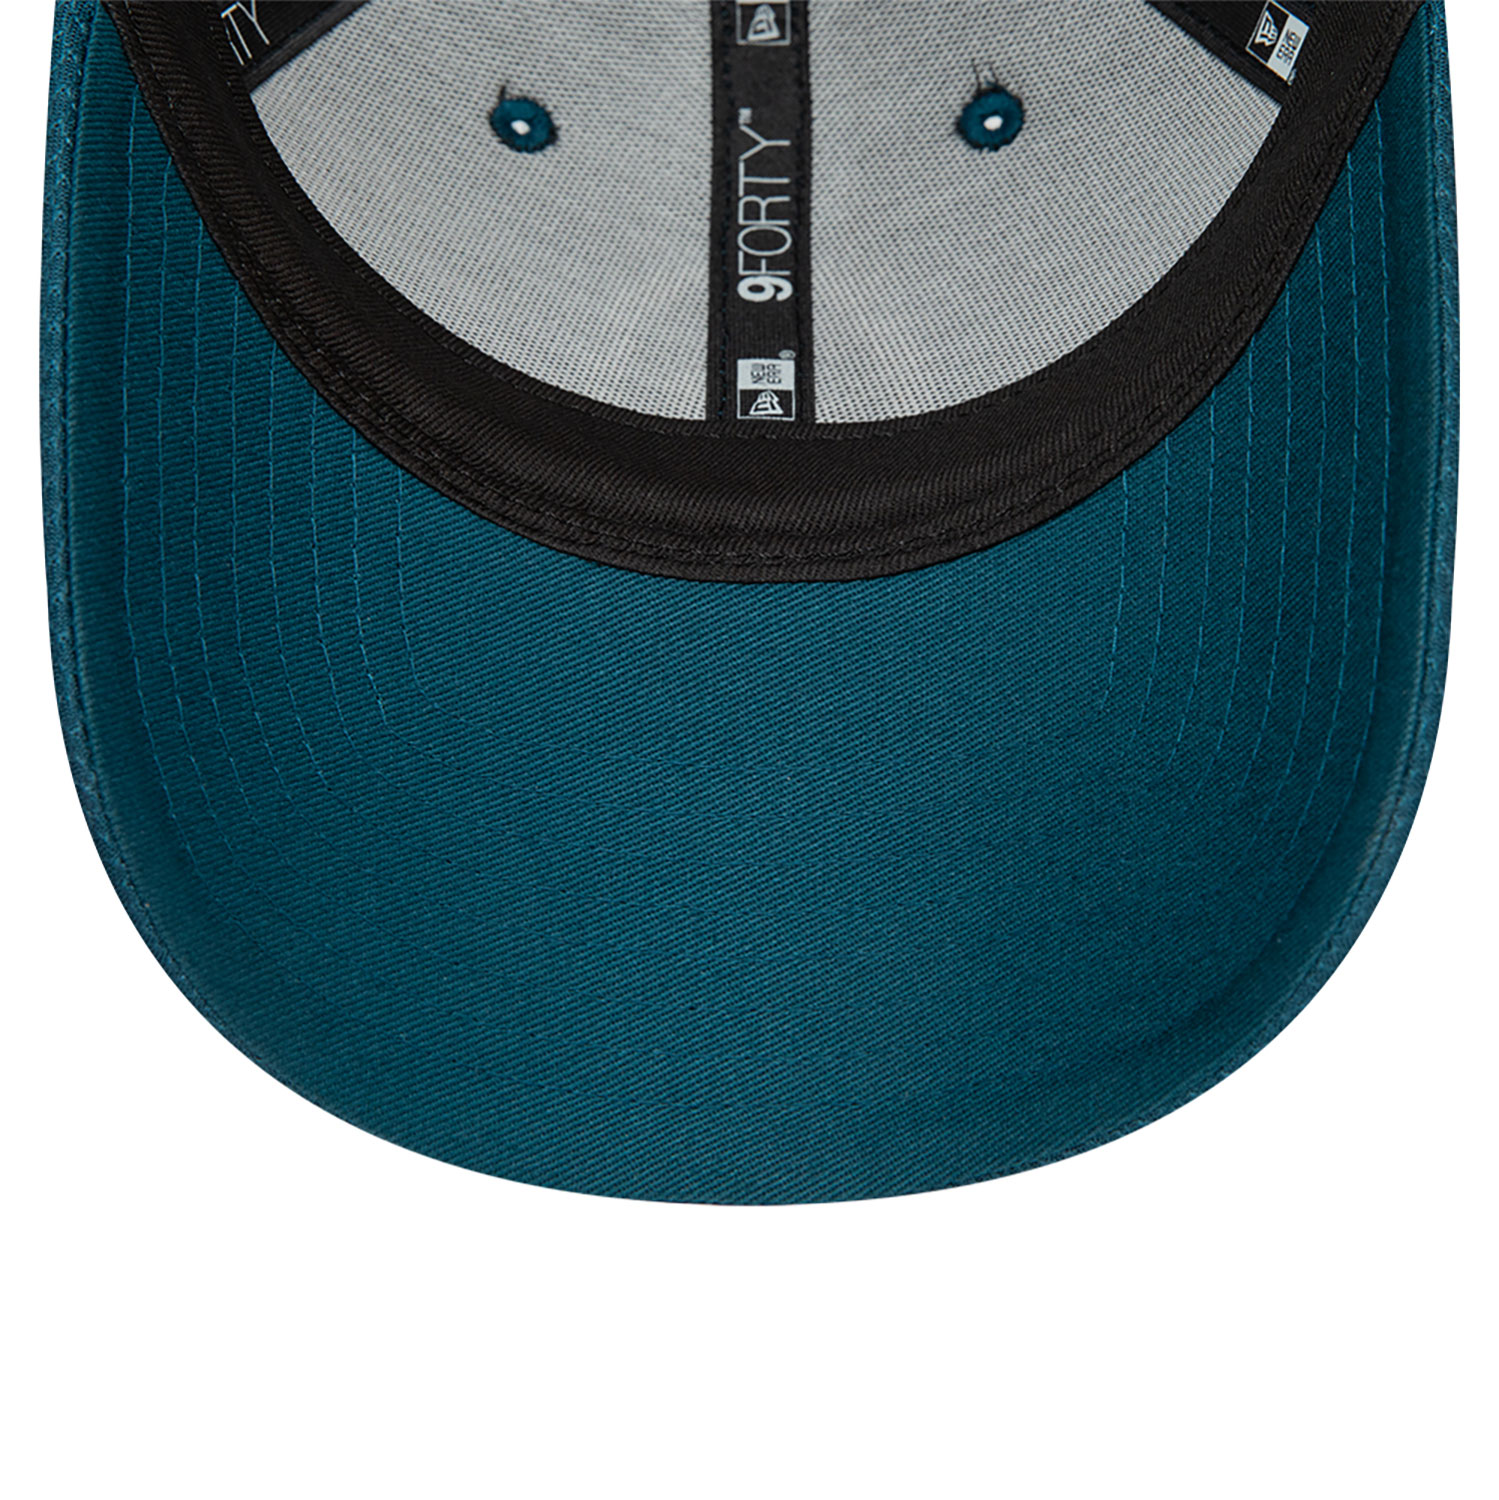 Oval Invincibles The Hundred Blue 9FORTY Adjustable Cap